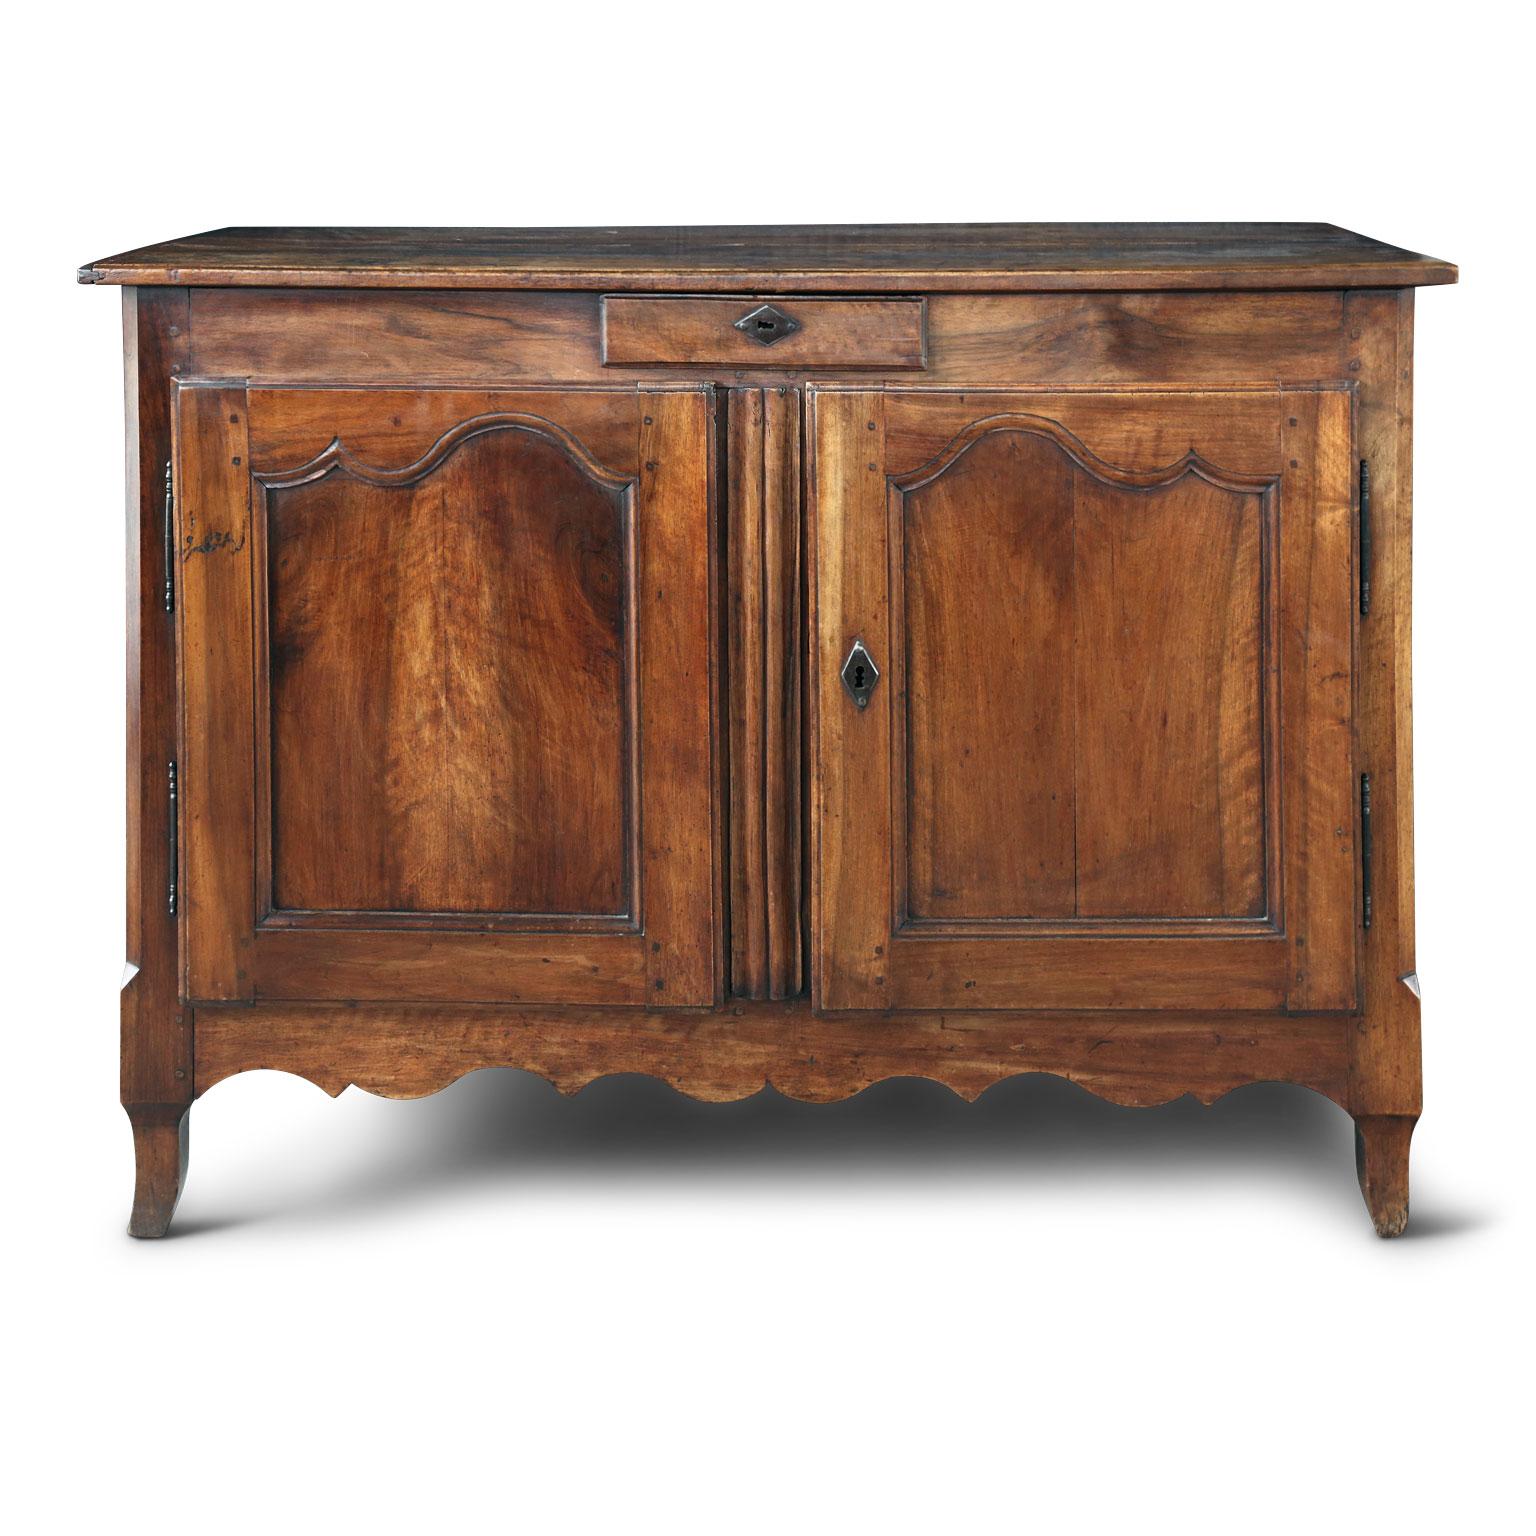 Large-scale Louis XV buffet, hand carved in walnut and cherry. Constructed circa 1760-1780 in a Provincial style using mortise and Tenon joints, dovetailed drawer and early hardware. Two doors and one drawer accessible with two keys and nice, old